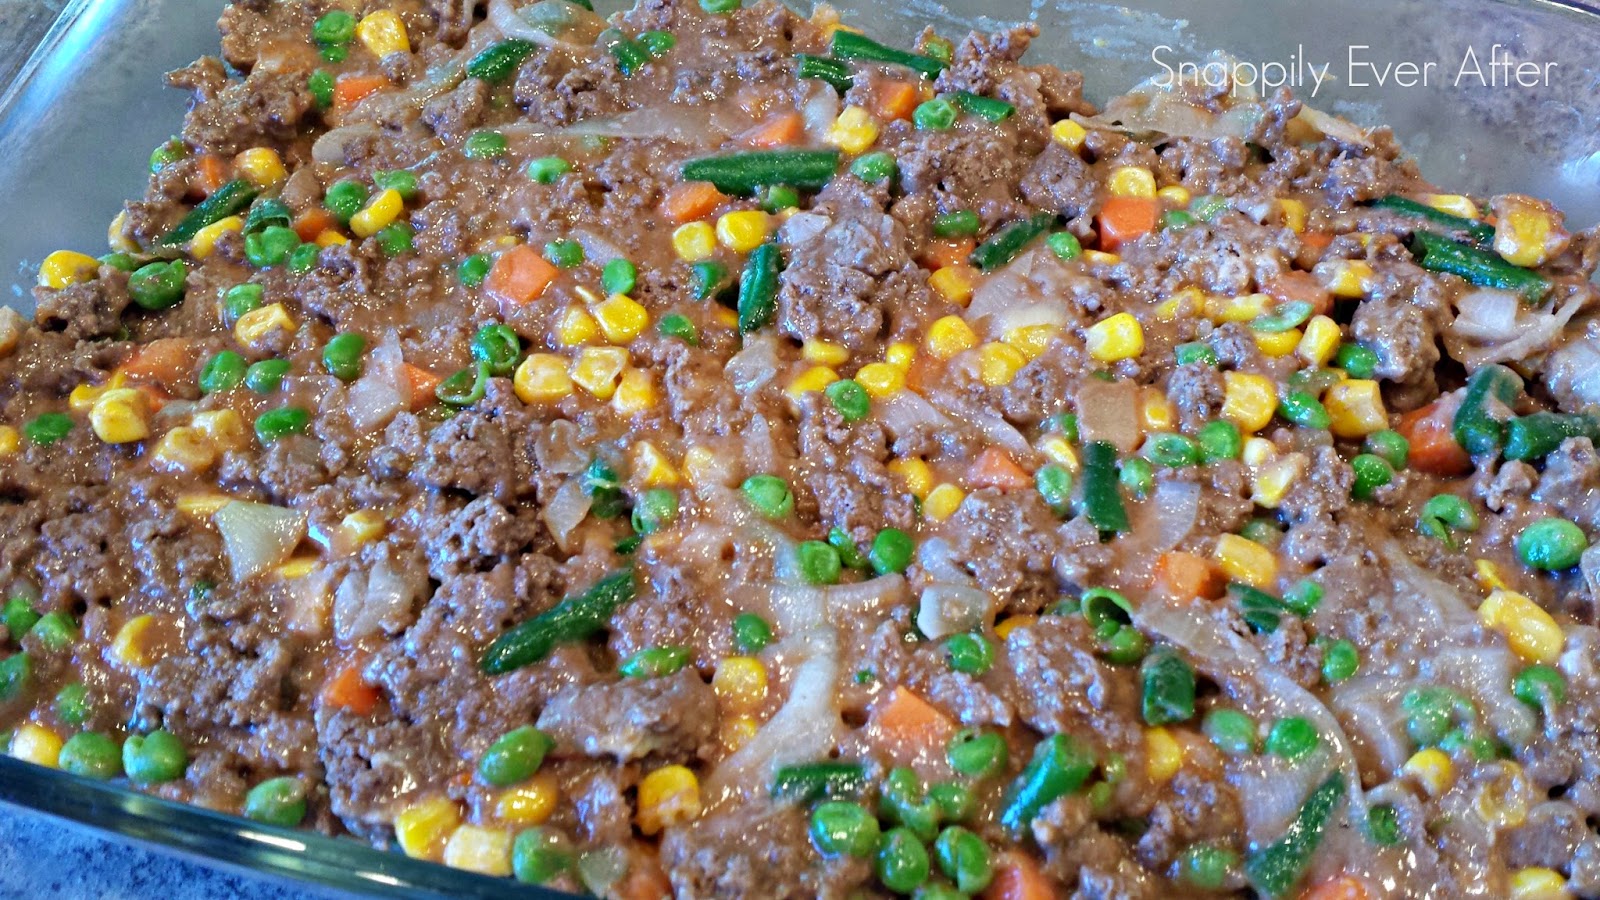 Snappily Ever After: Shepherd's Pie